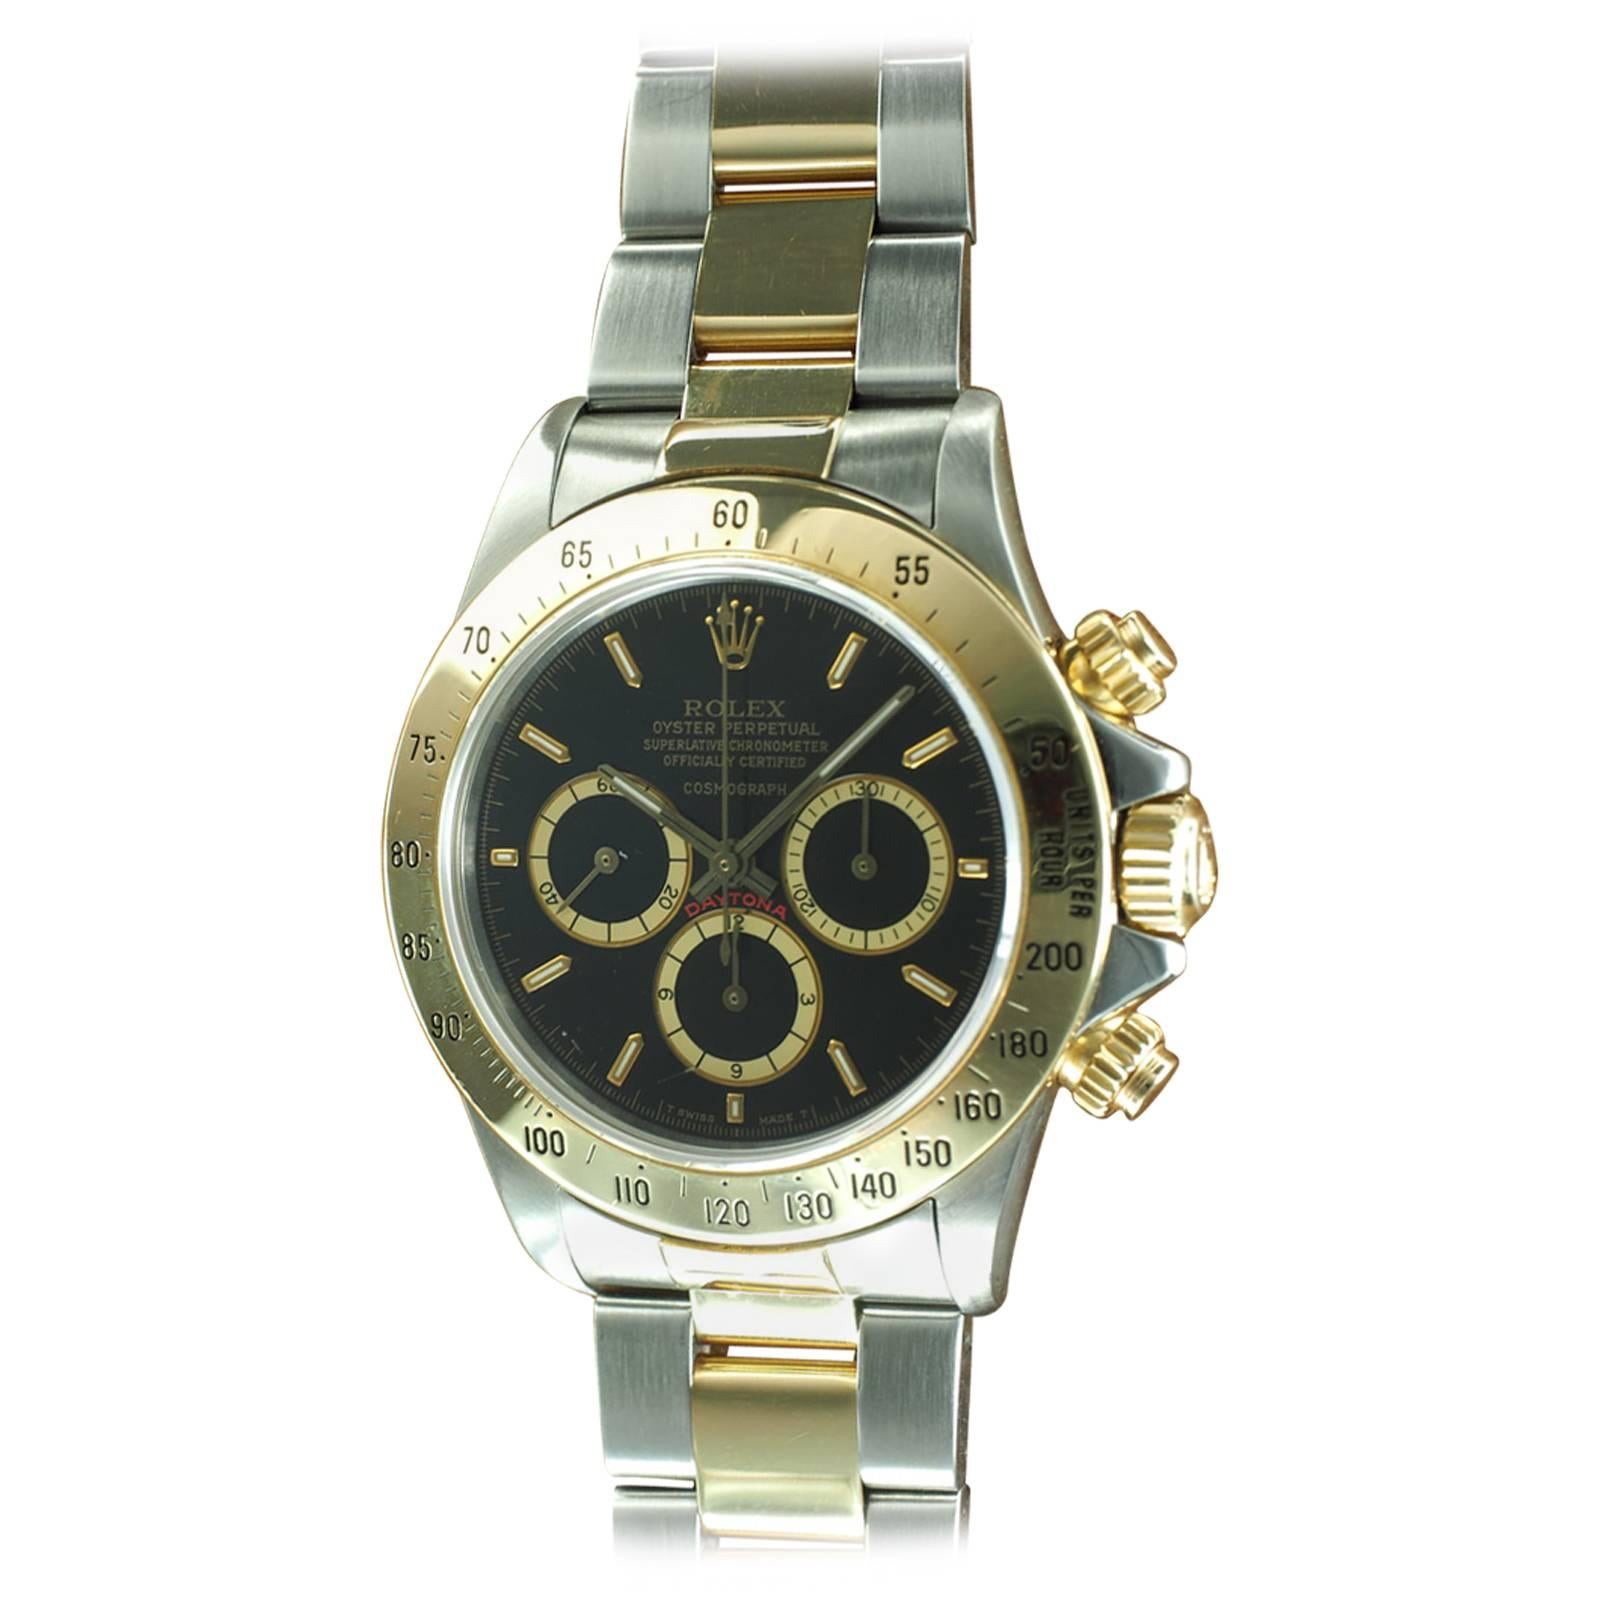 Rolex Yellow Gold Stainless Steel Cosmography Daytona Wristwatch Ref 16523 For Sale